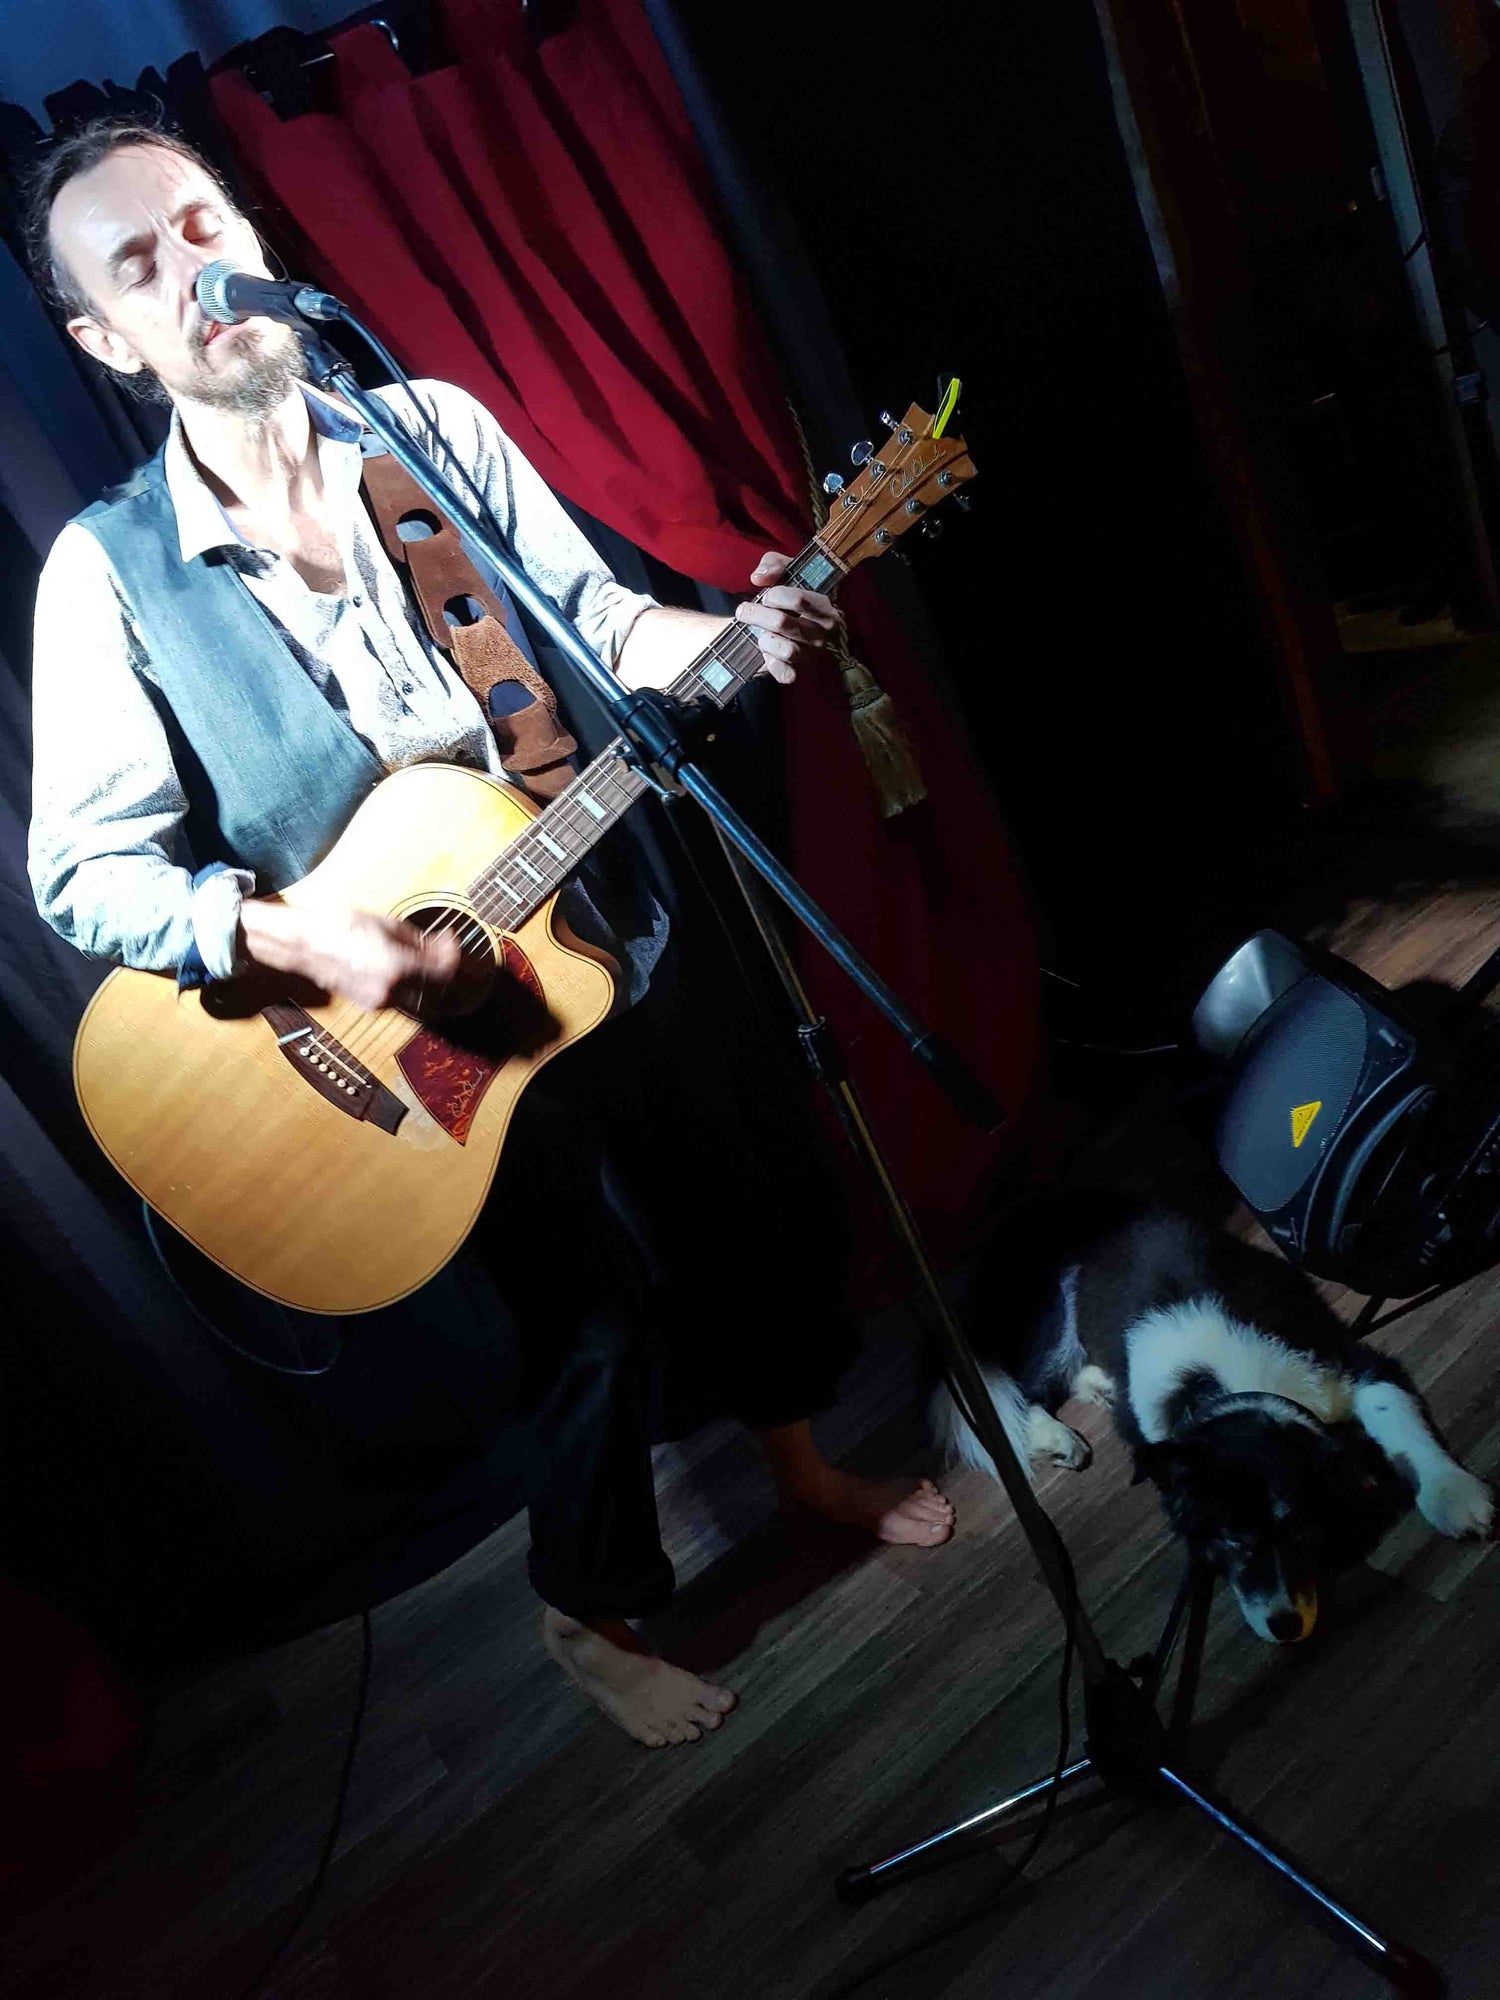 Kieran Wicks Performing Live singing and playing guitar on Stage in Mackay, Border COllie dog asleep on stage Red Stage Curtains 